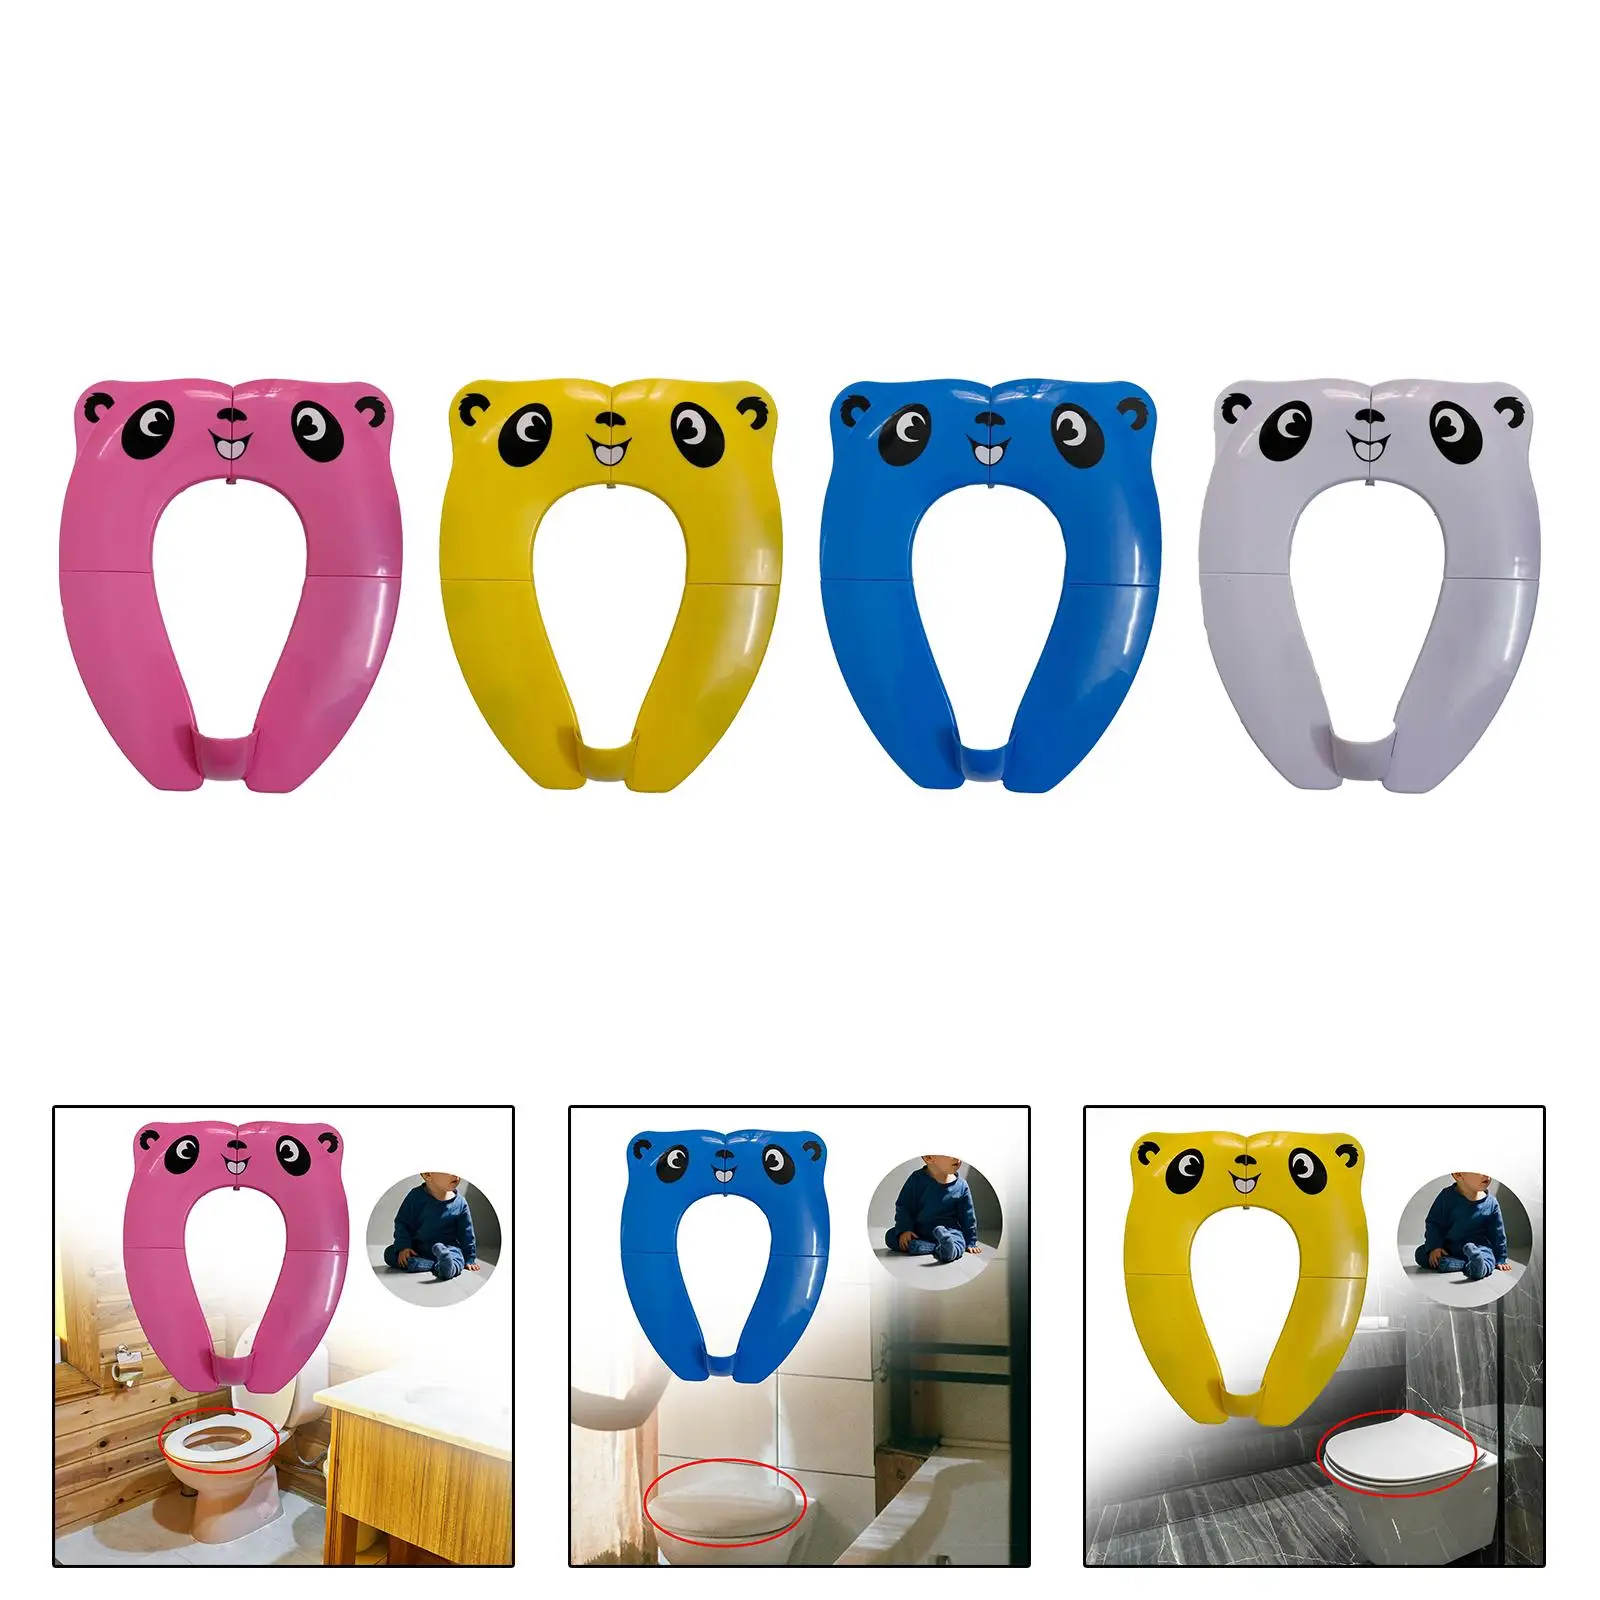 Folding Toilet Seat, Toilet Training Potty Seat Cover, Toilet Pad Cushion for Travel Household